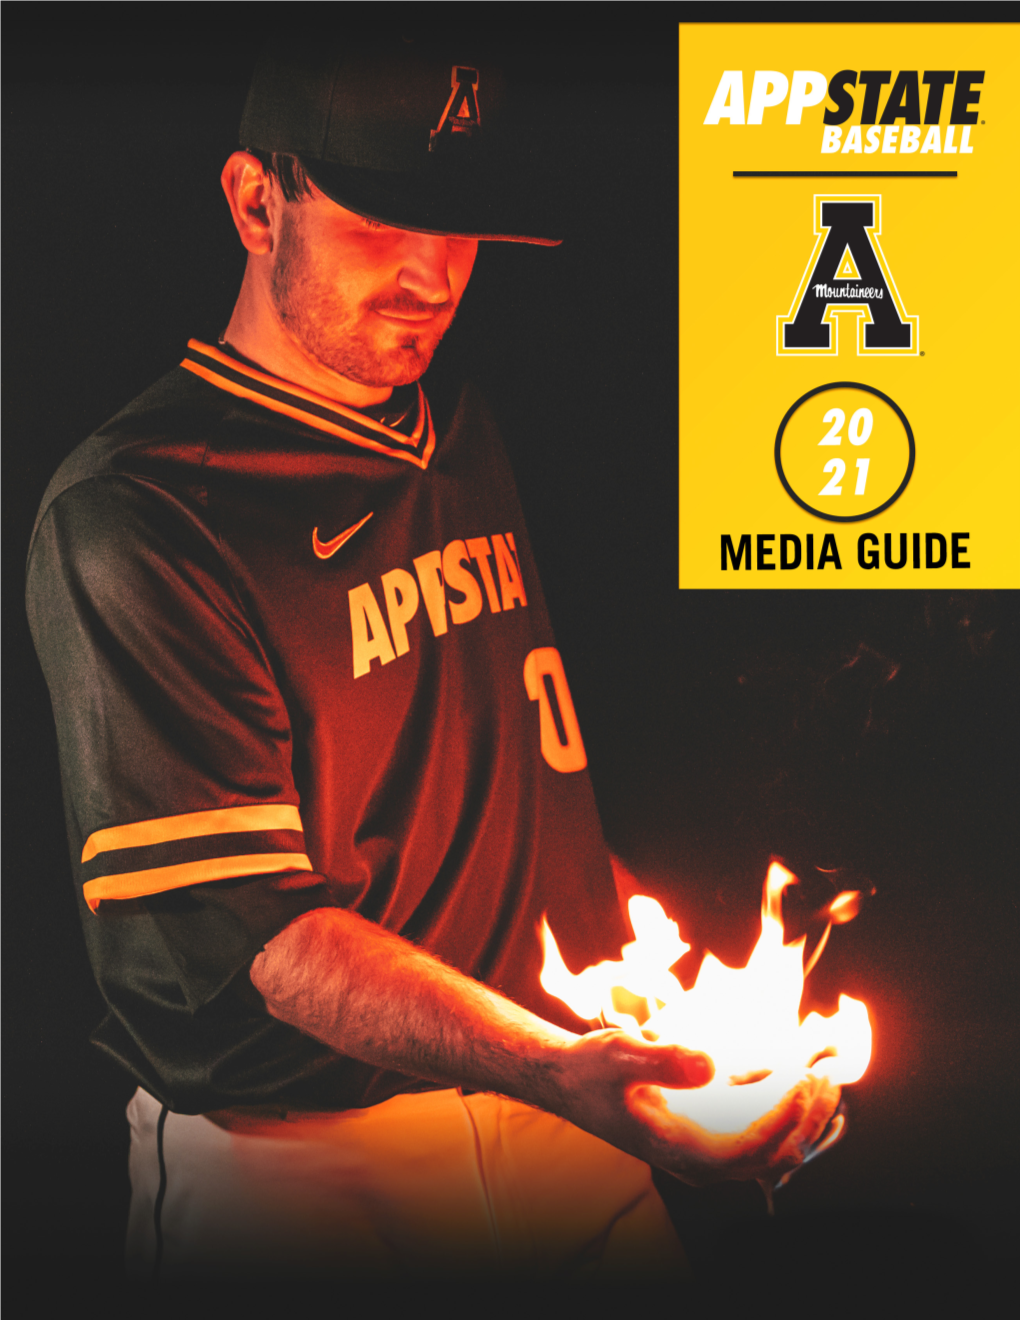 APP STATE BASEBALL 2021 SCHEDULE DATE Day of Week Time H/A/N Opponent Location Feb